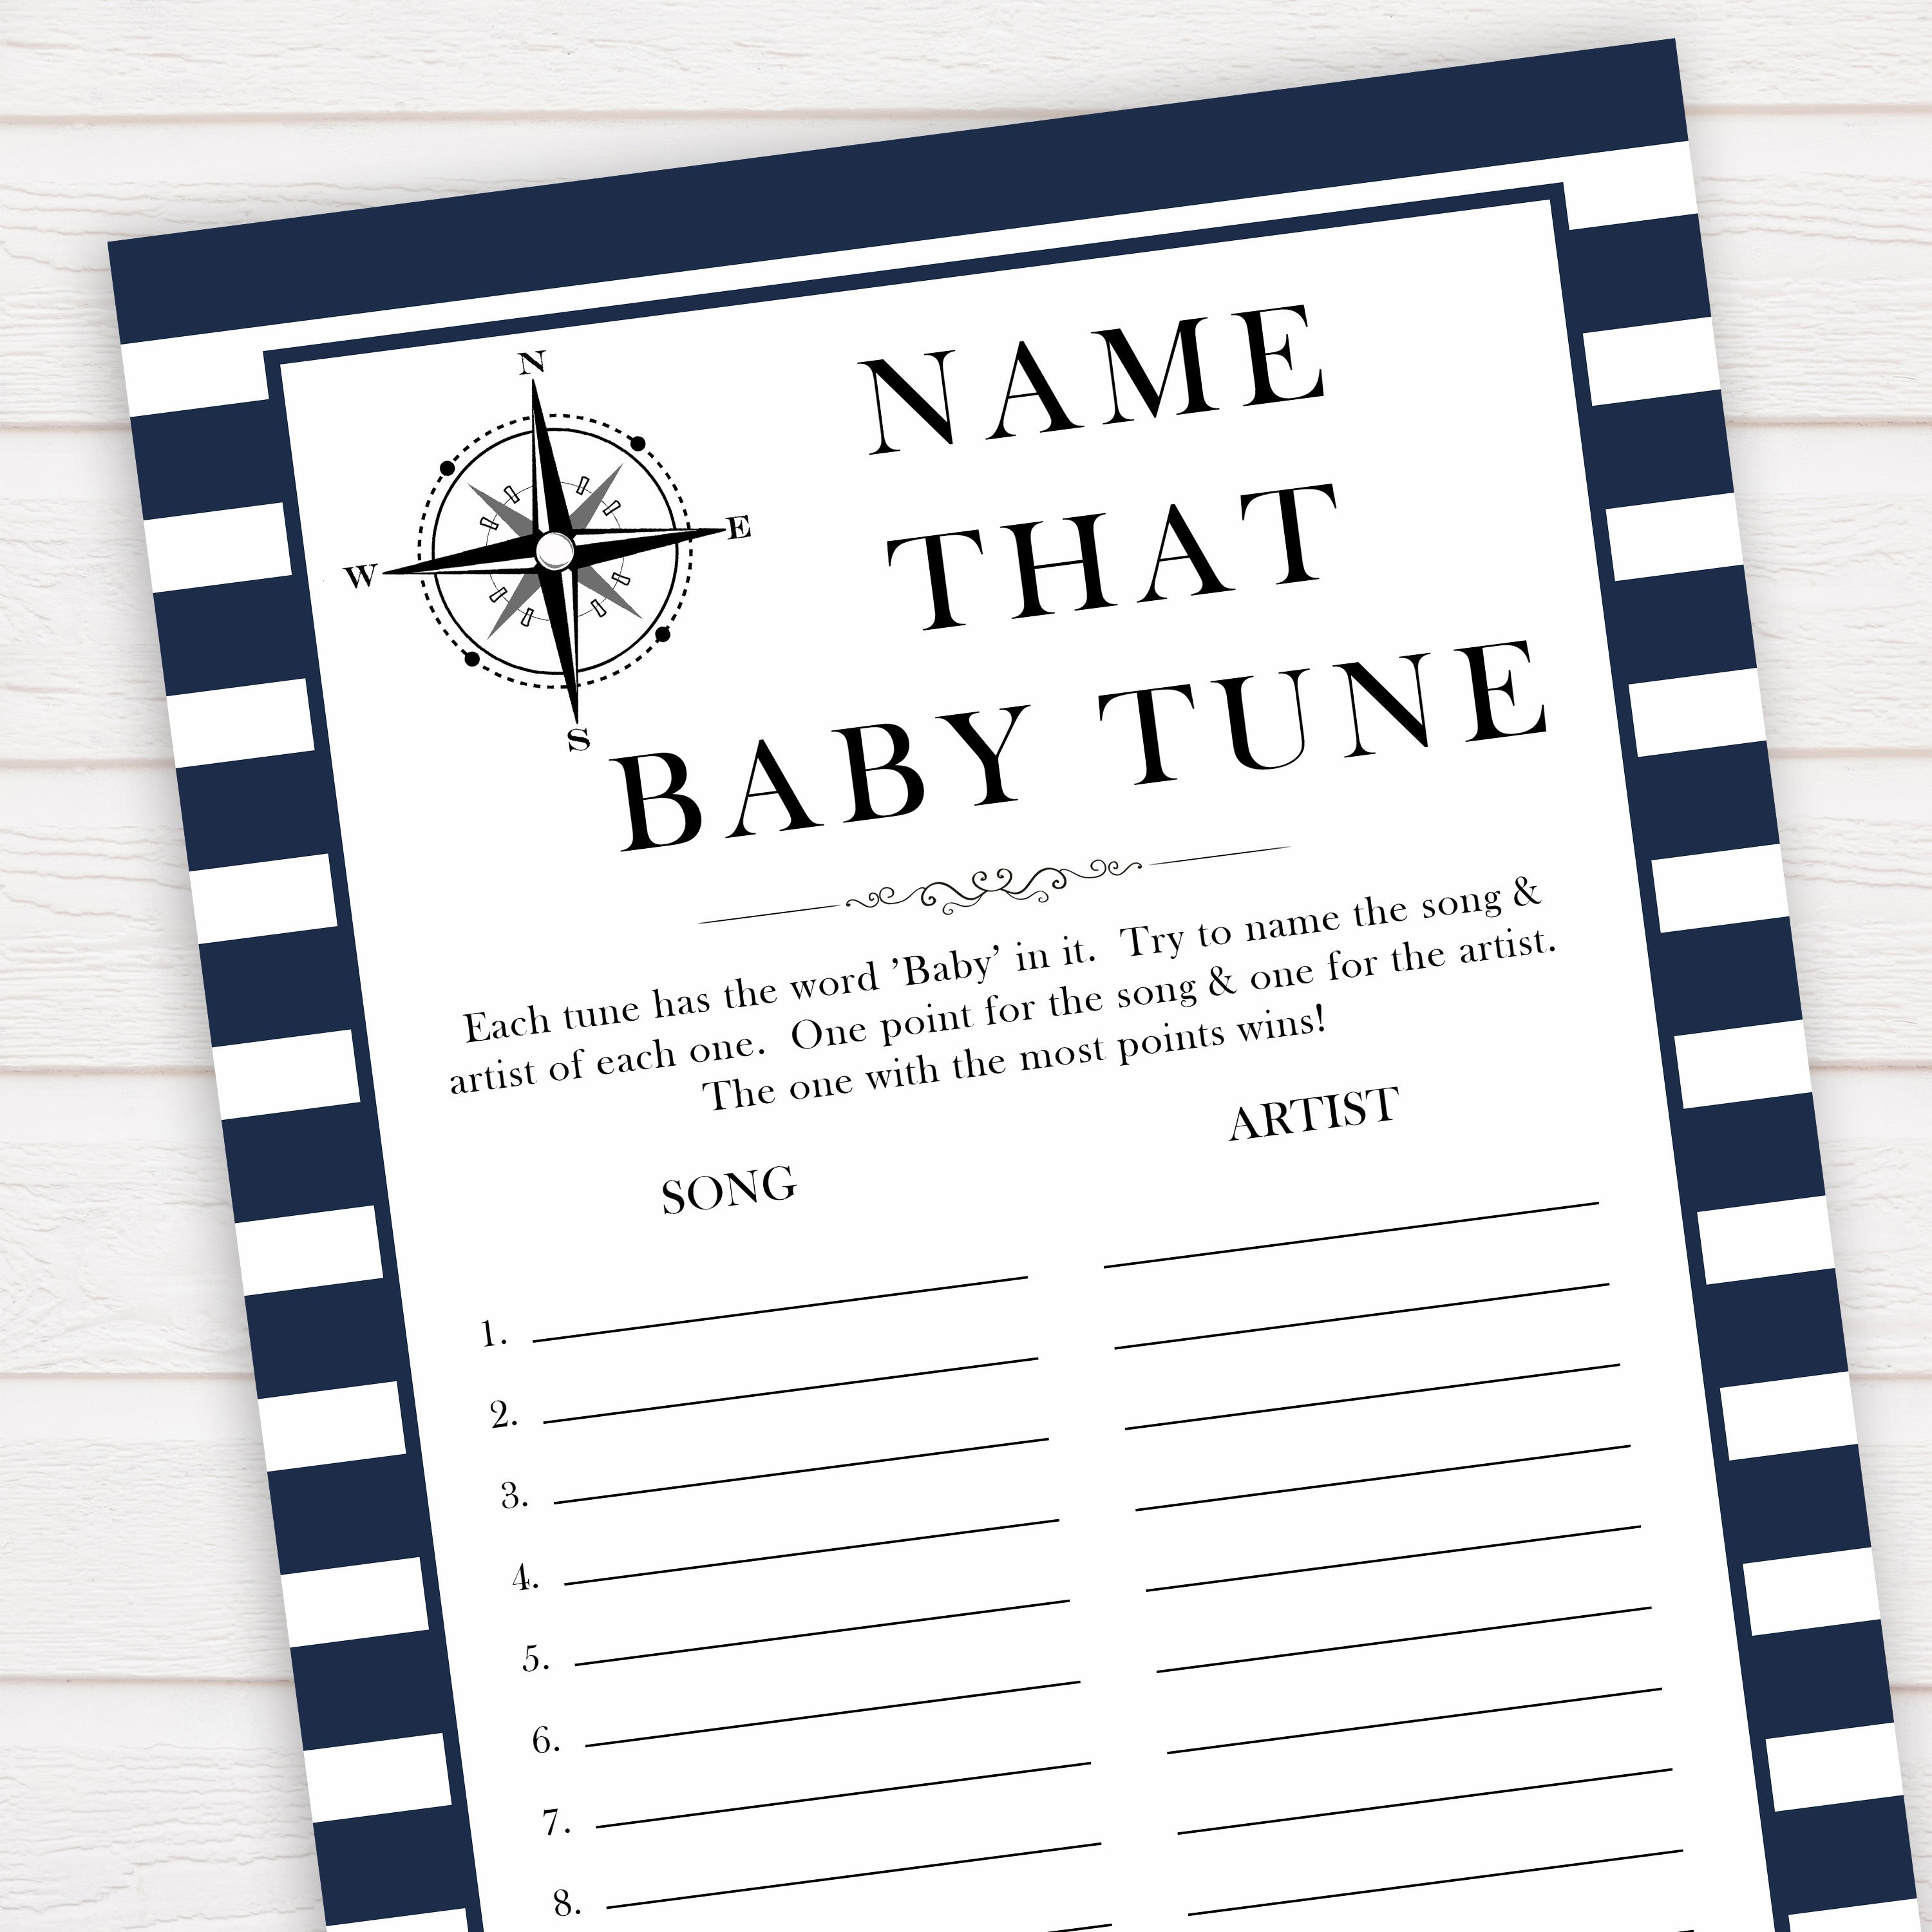 Nautical baby shower games, name that baby tune baby shower games, printable baby shower games, baby shower games, fun baby games, ahoy its a boy, popular baby shower games, sailor baby games, boat baby games